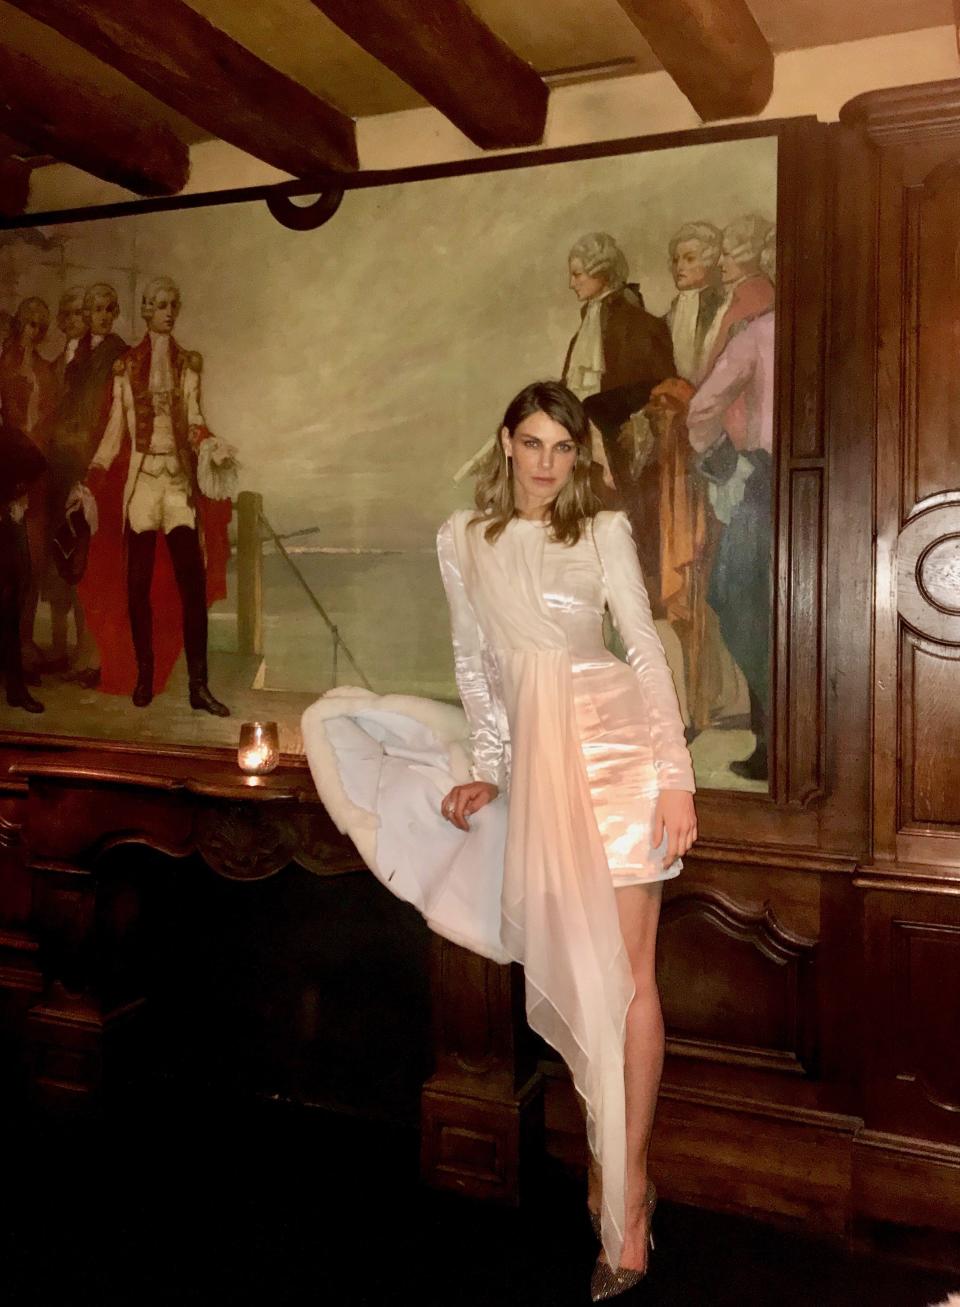 This night I was out feeling the divine feminine energy of Paris, wearing this beautiful white dress by Kamilla Purshie, to celebrate the launch of <em>Von</em> magazine. Truly an inspiration of strong, sexy women! It was held at the Lapérouse, a building with such history that if walls could talk our jaws would drop!